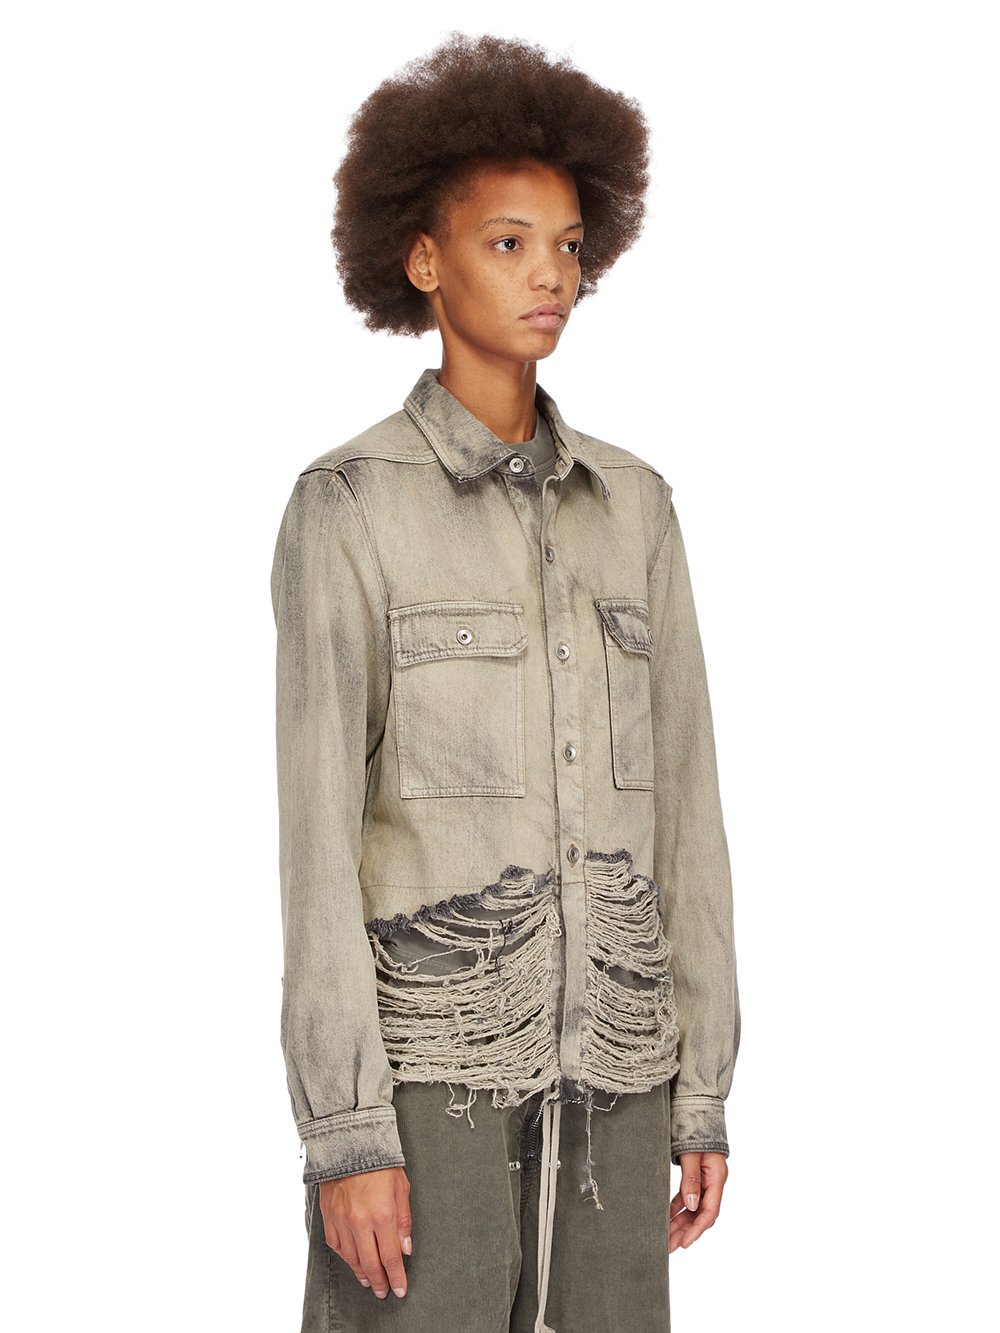 DRKSHDW FW23 LUXOR CAPE SLEEVE CROPPED OUTERSHIRT IN 13OZ MINERAL PEARL DENIM